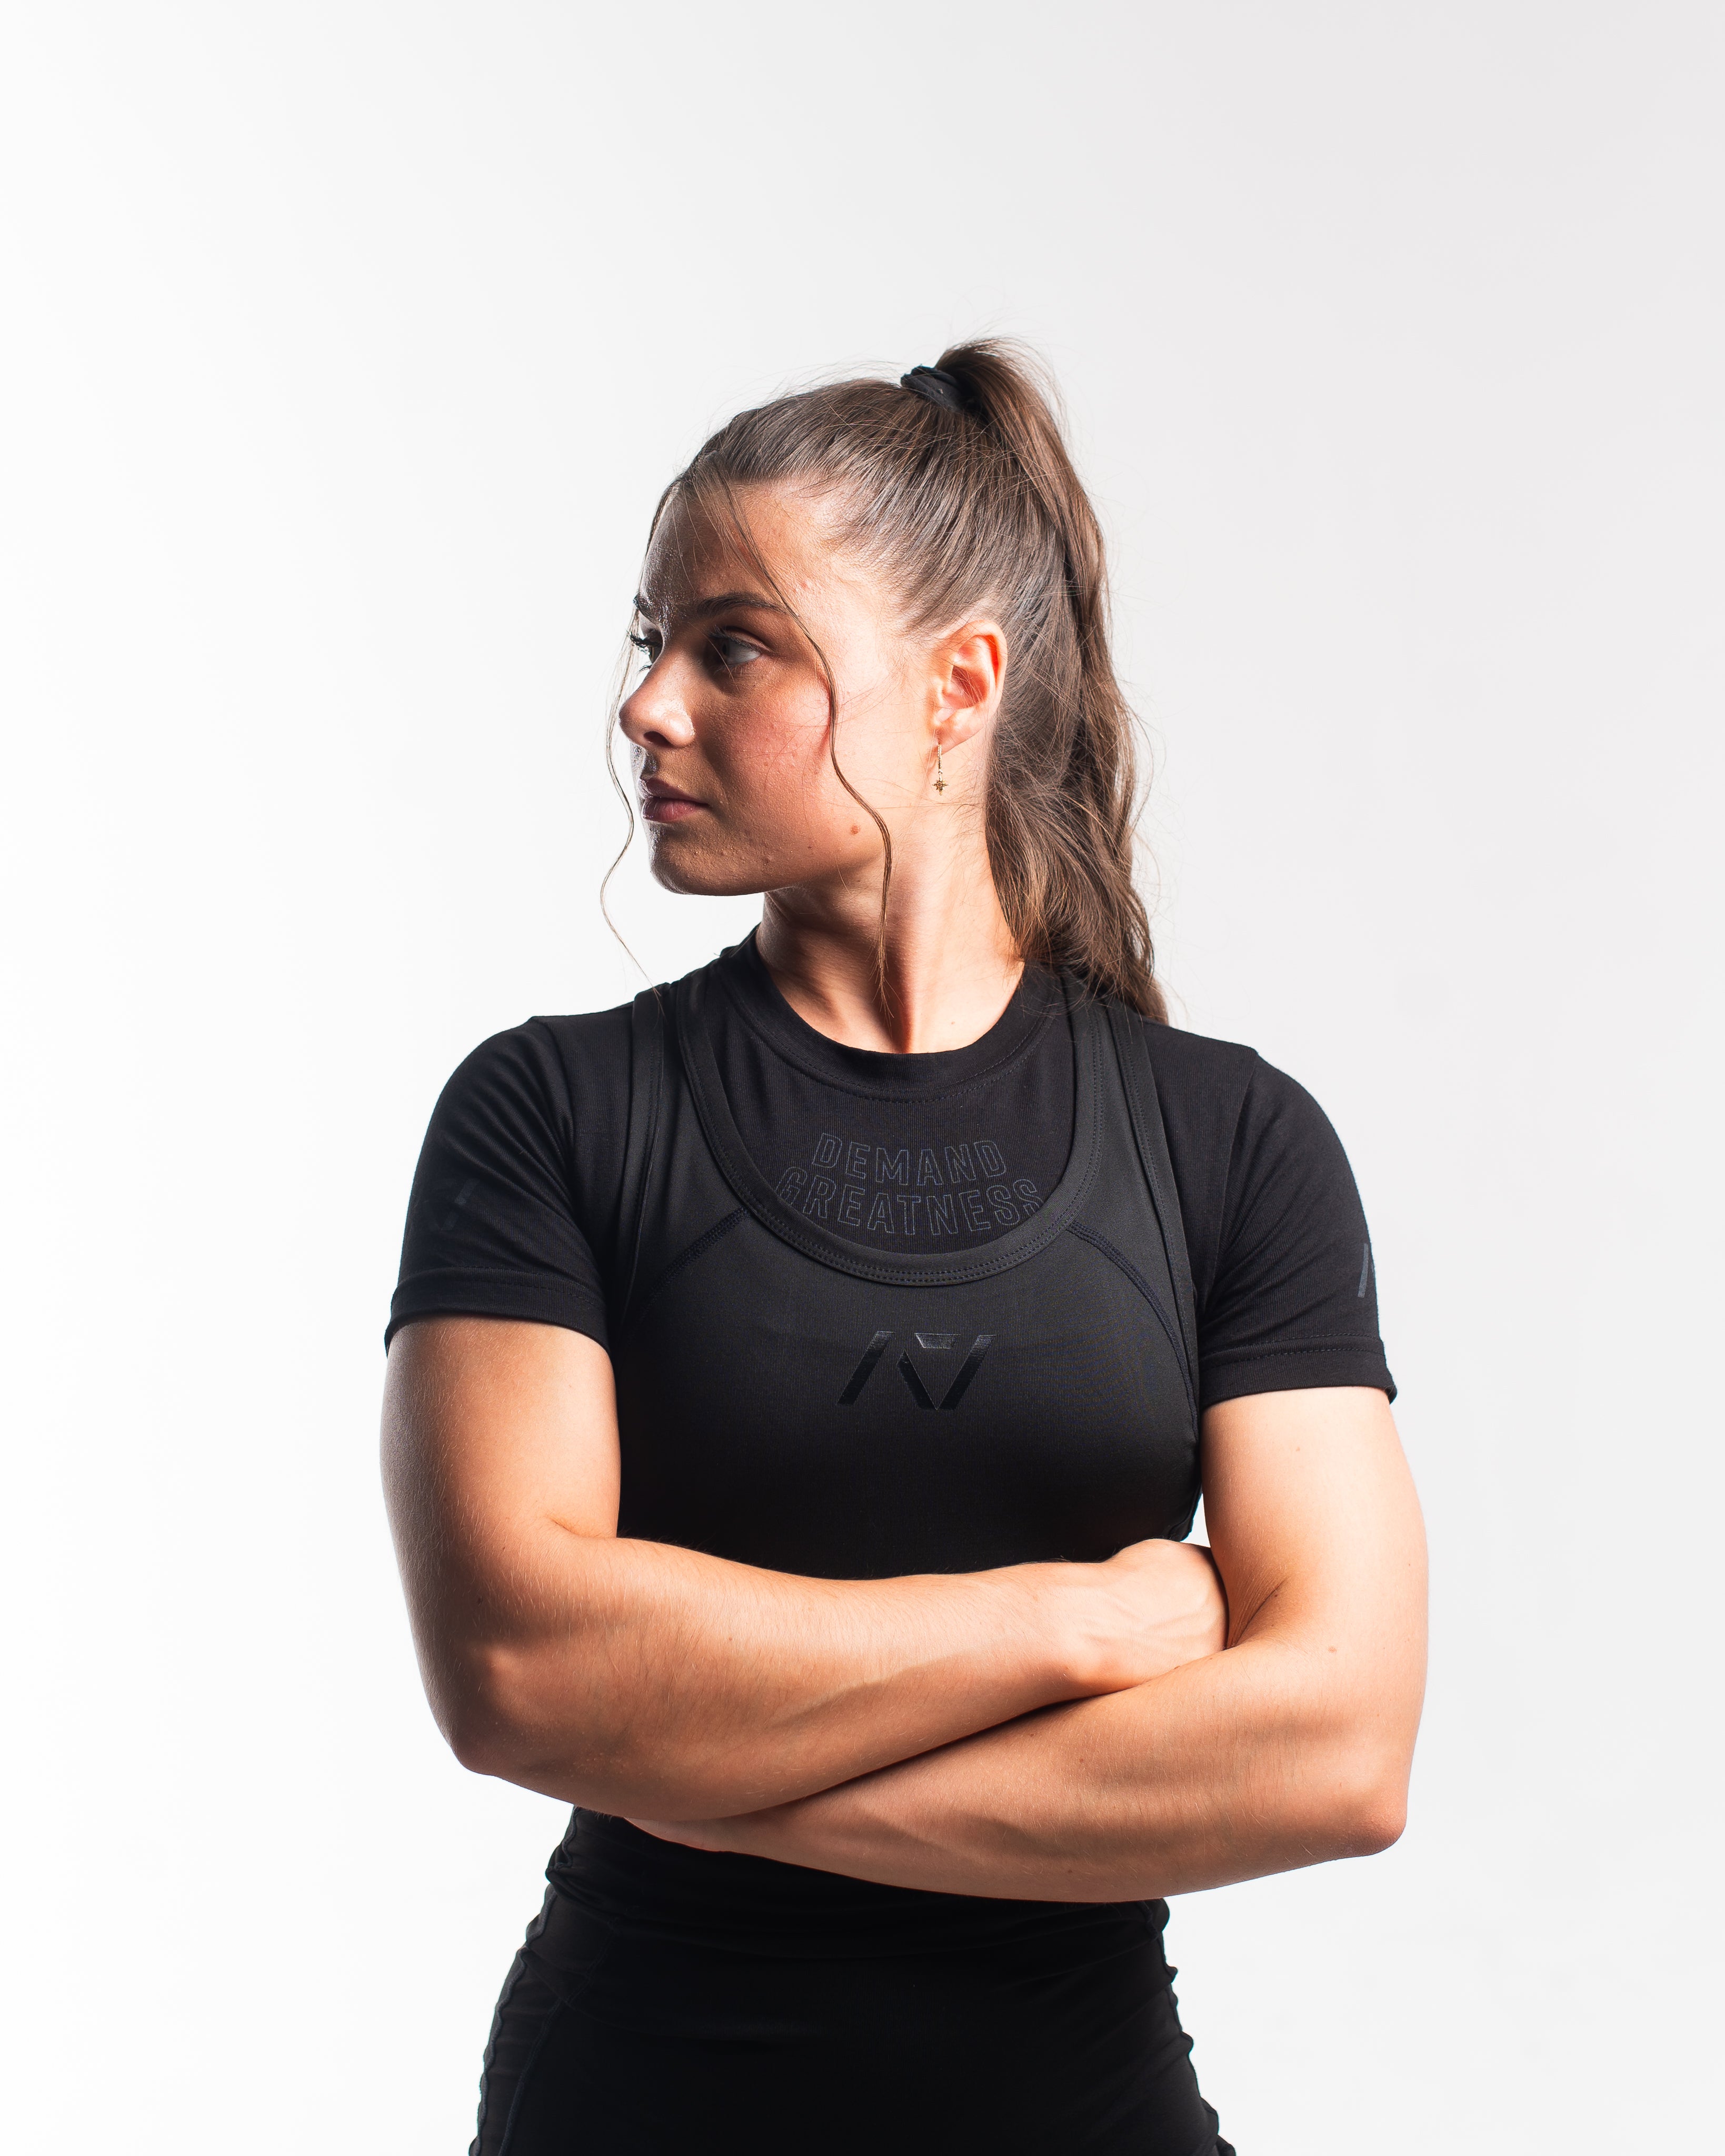 A7 IPF Approved Stealth Luno singlet with extra lat mobility, side panel stitching to guide the squat depth level and curved panel design for a slimming look. The Women's singlet features a tapered waist and additional quad room. The IPF Approved Kit includes Powerlifting Singlet, A7 Meet Shirt, A7 Zebra Wrist Wraps, A7 Deadlift Socks, Hourglass Knee Sleeves (Stiff Knee Sleeves and Rigor Mortis Knee Sleeves). Genouillères powerlifting shipping to France, Spain, Ireland, Germany, Italy, Sweden and EU.